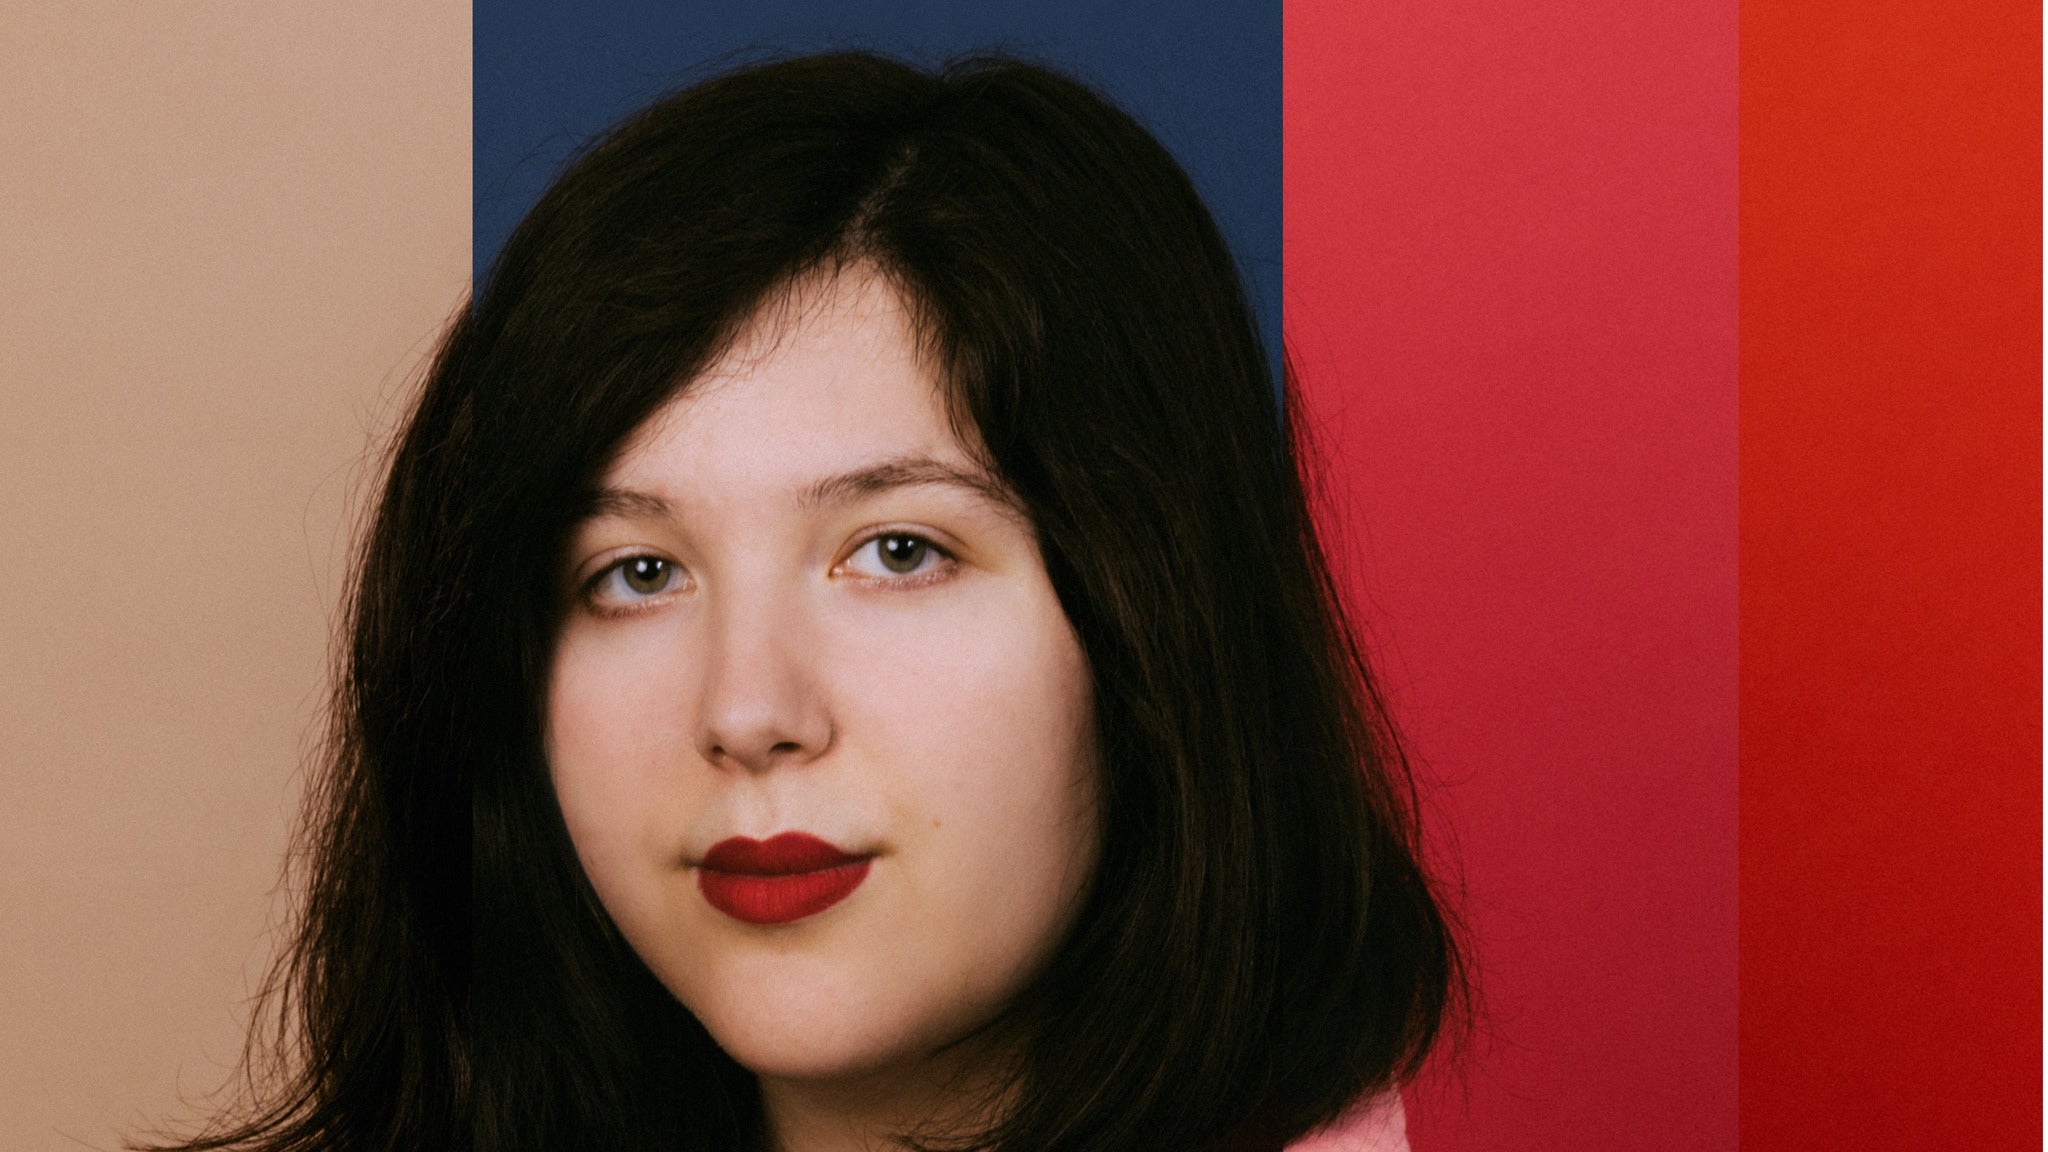 Lucy Dacus in Detroit event information